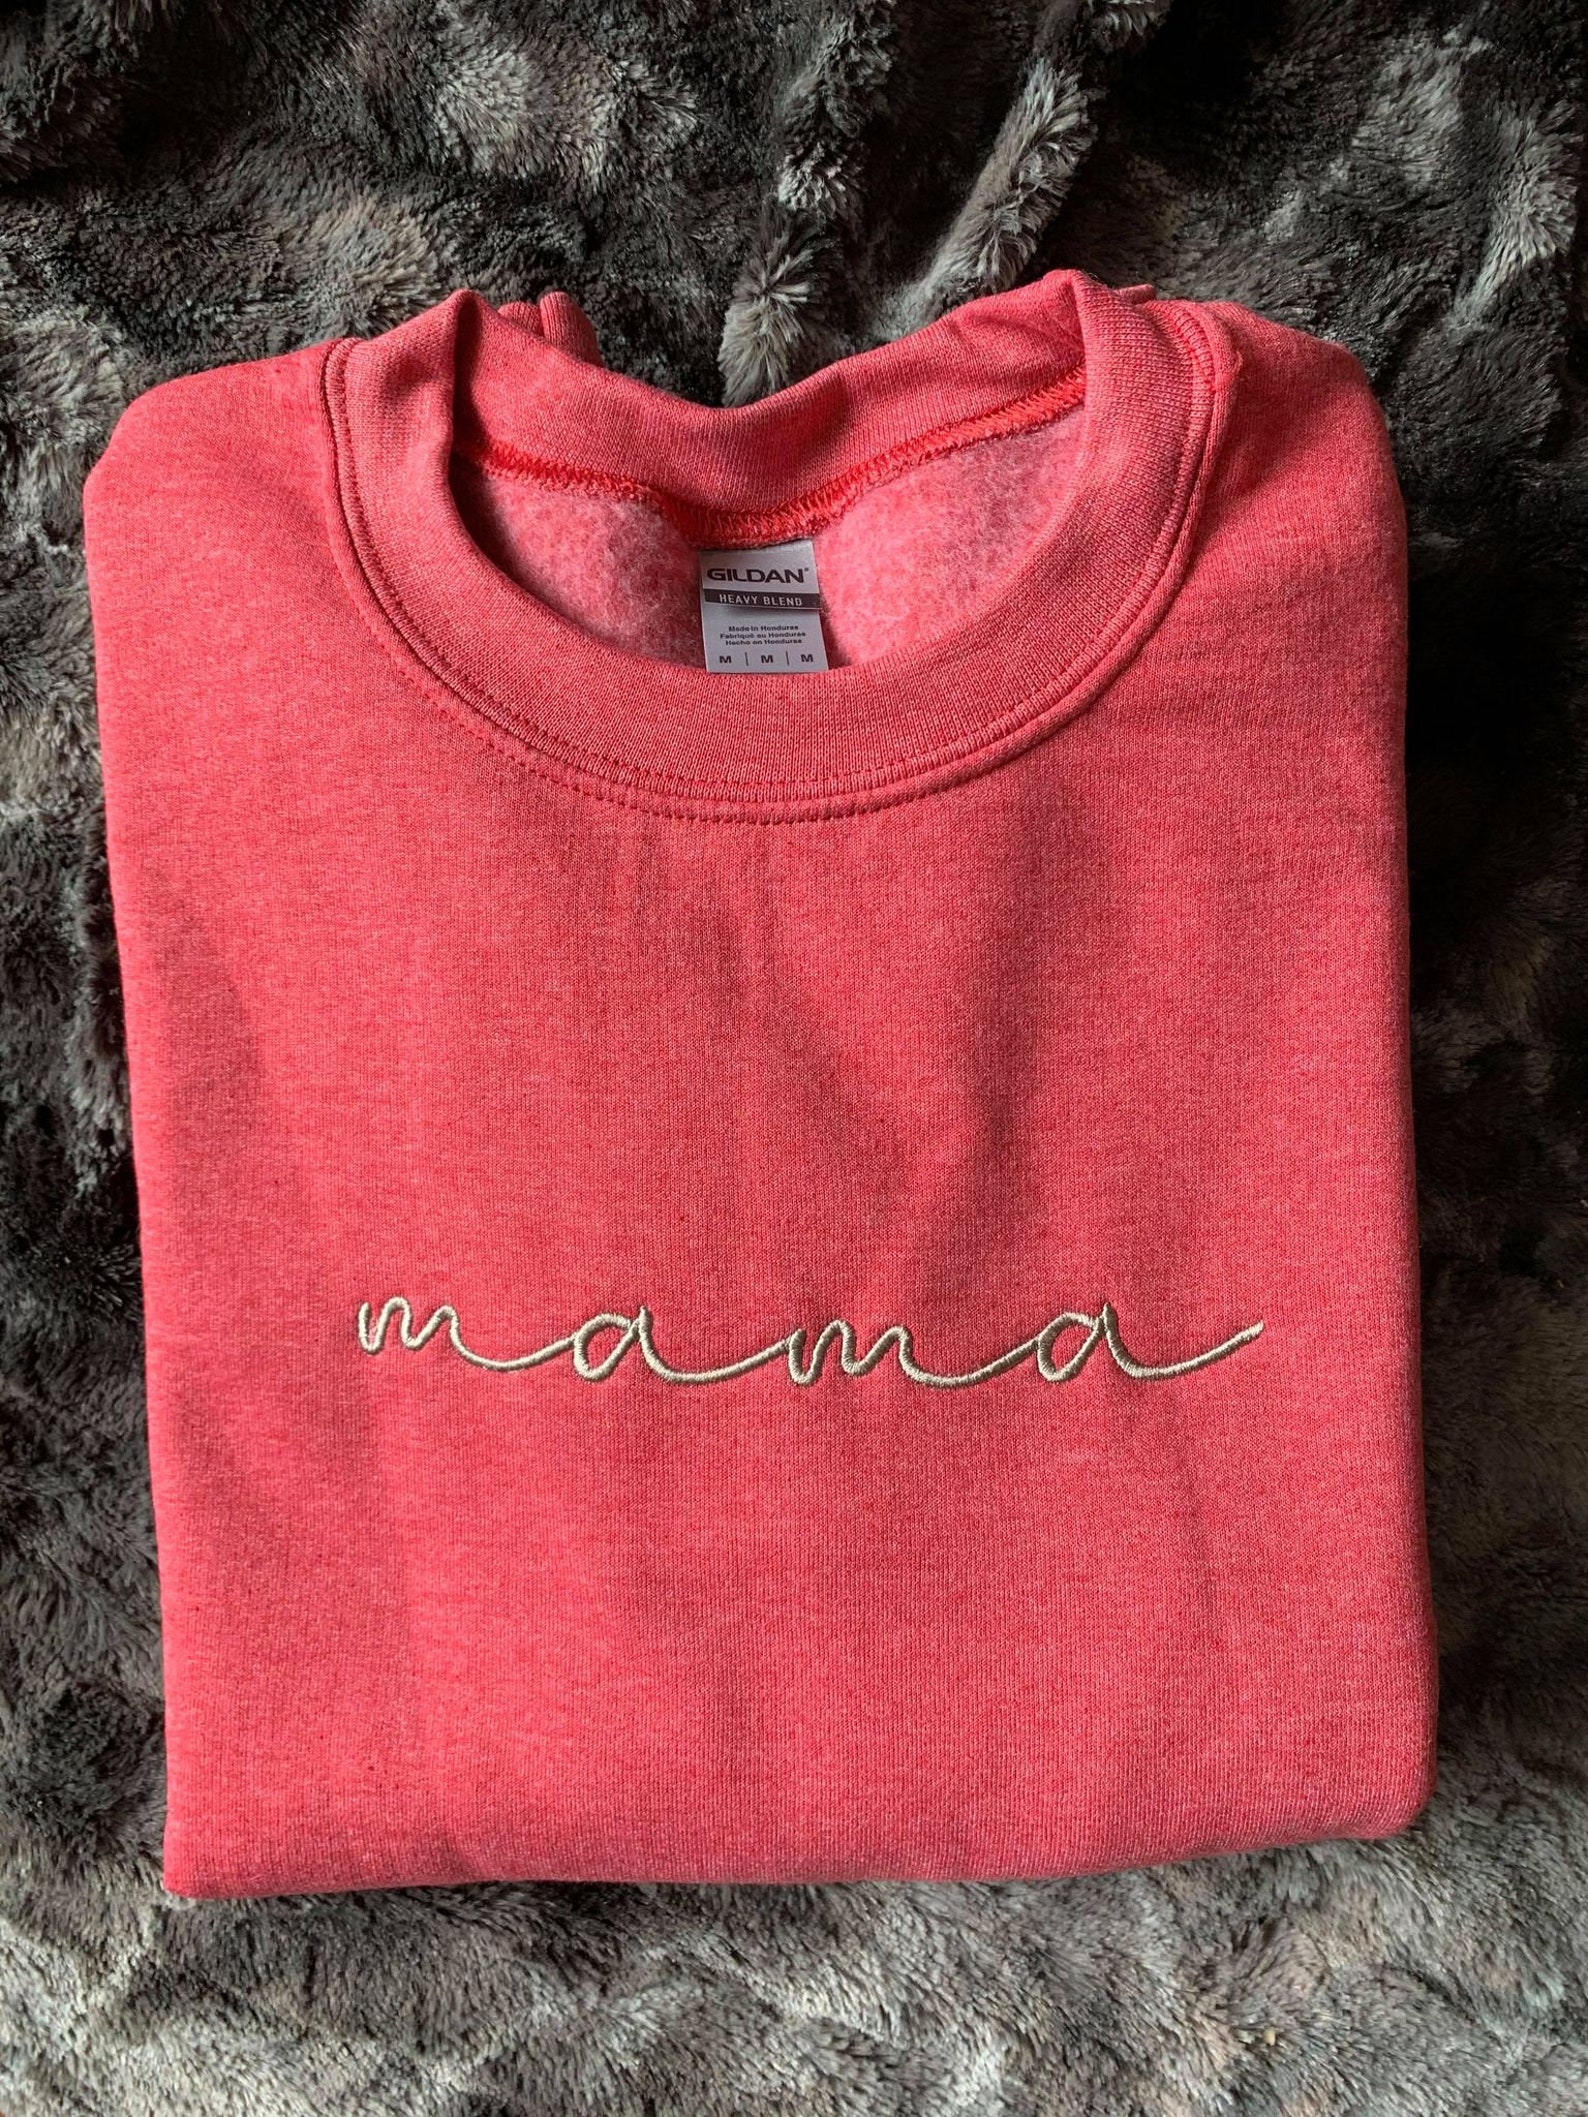 Red mama embroidered sweater | Etsy